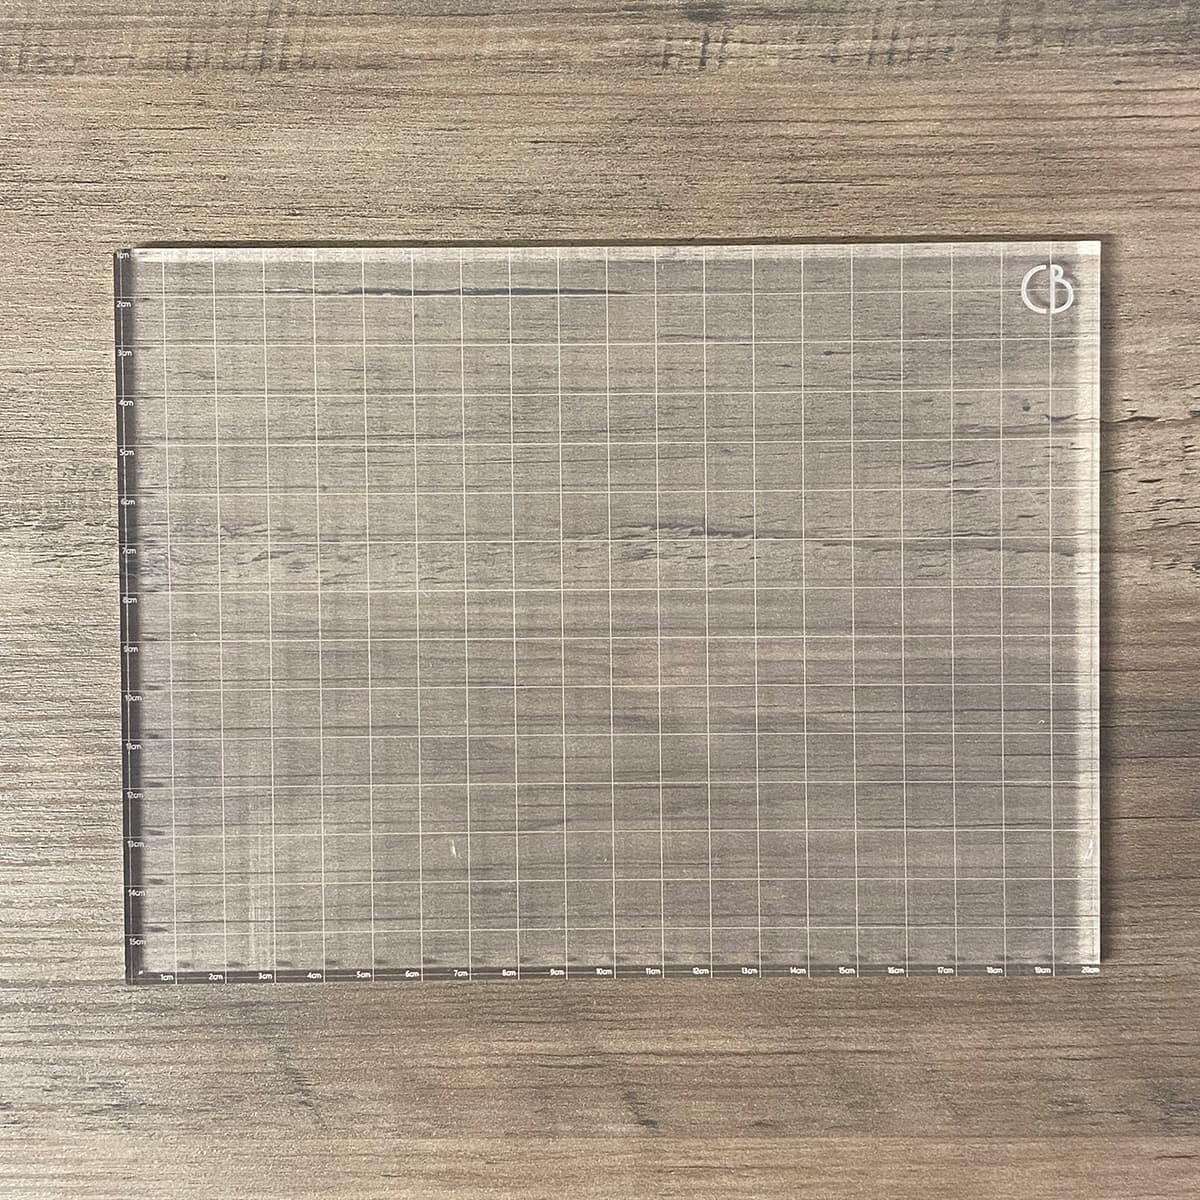 Ciao Bella Acrylic Block 15 x 20 cm With Grid Lines